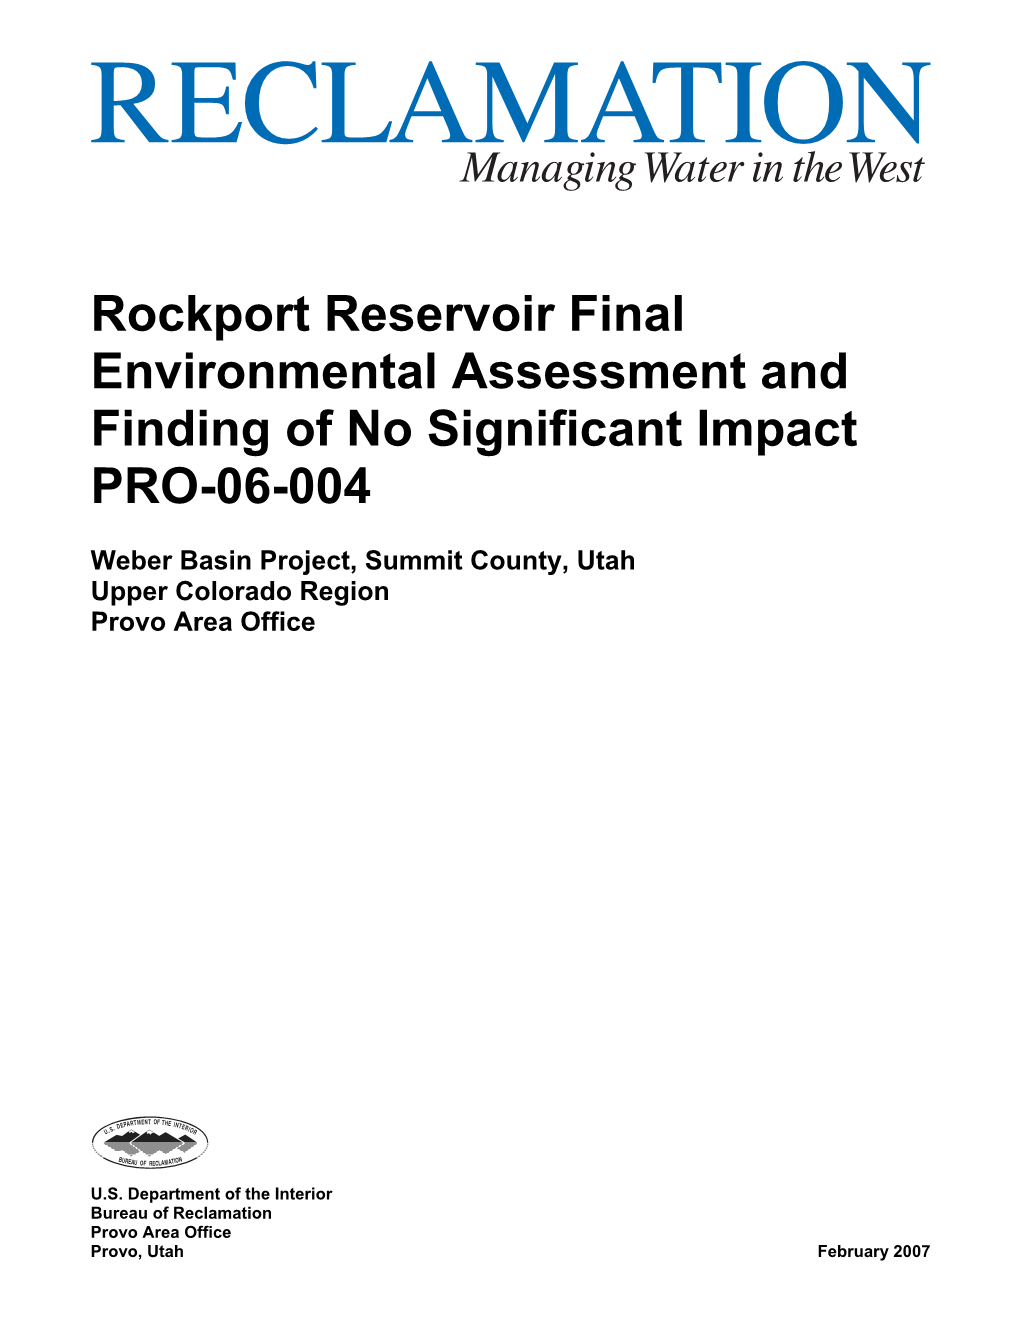 Rockport Reservoir Final Environmental Assessment and Finding of No Significant Impact PRO-06-004